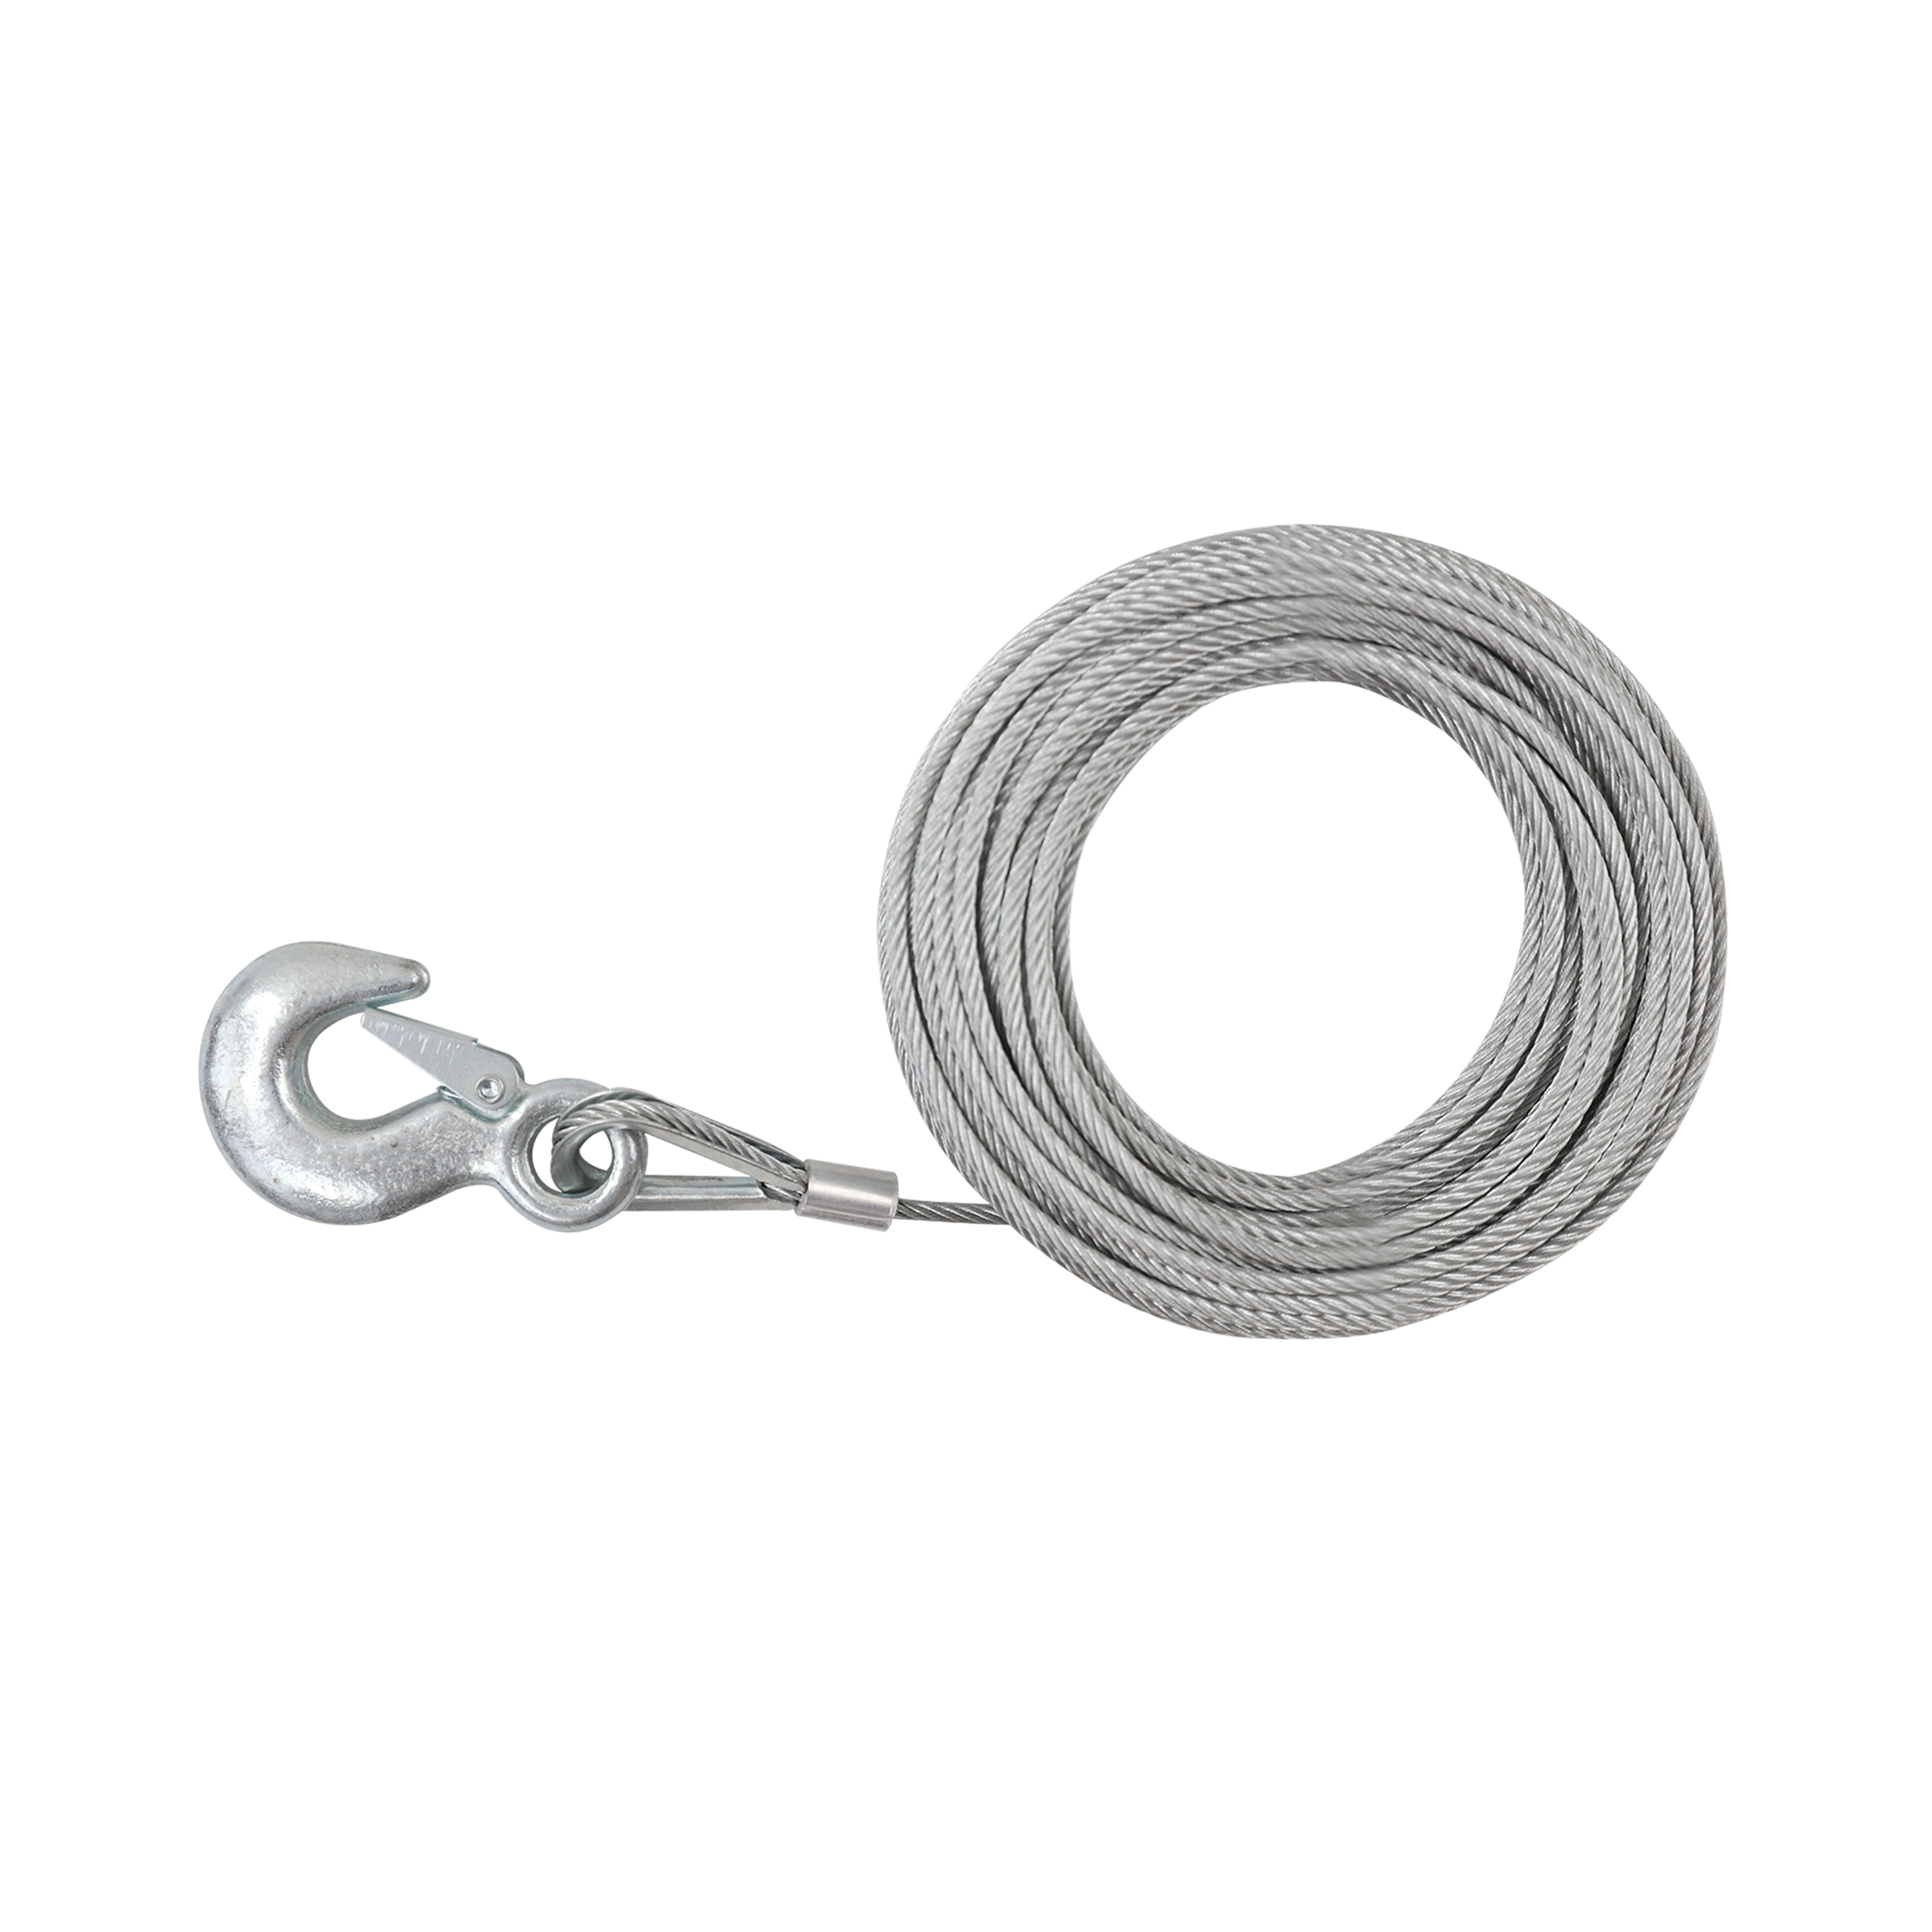 Wholesale Winch Ropes from Manufacturers, Winch Ropes Products at Factory  Prices